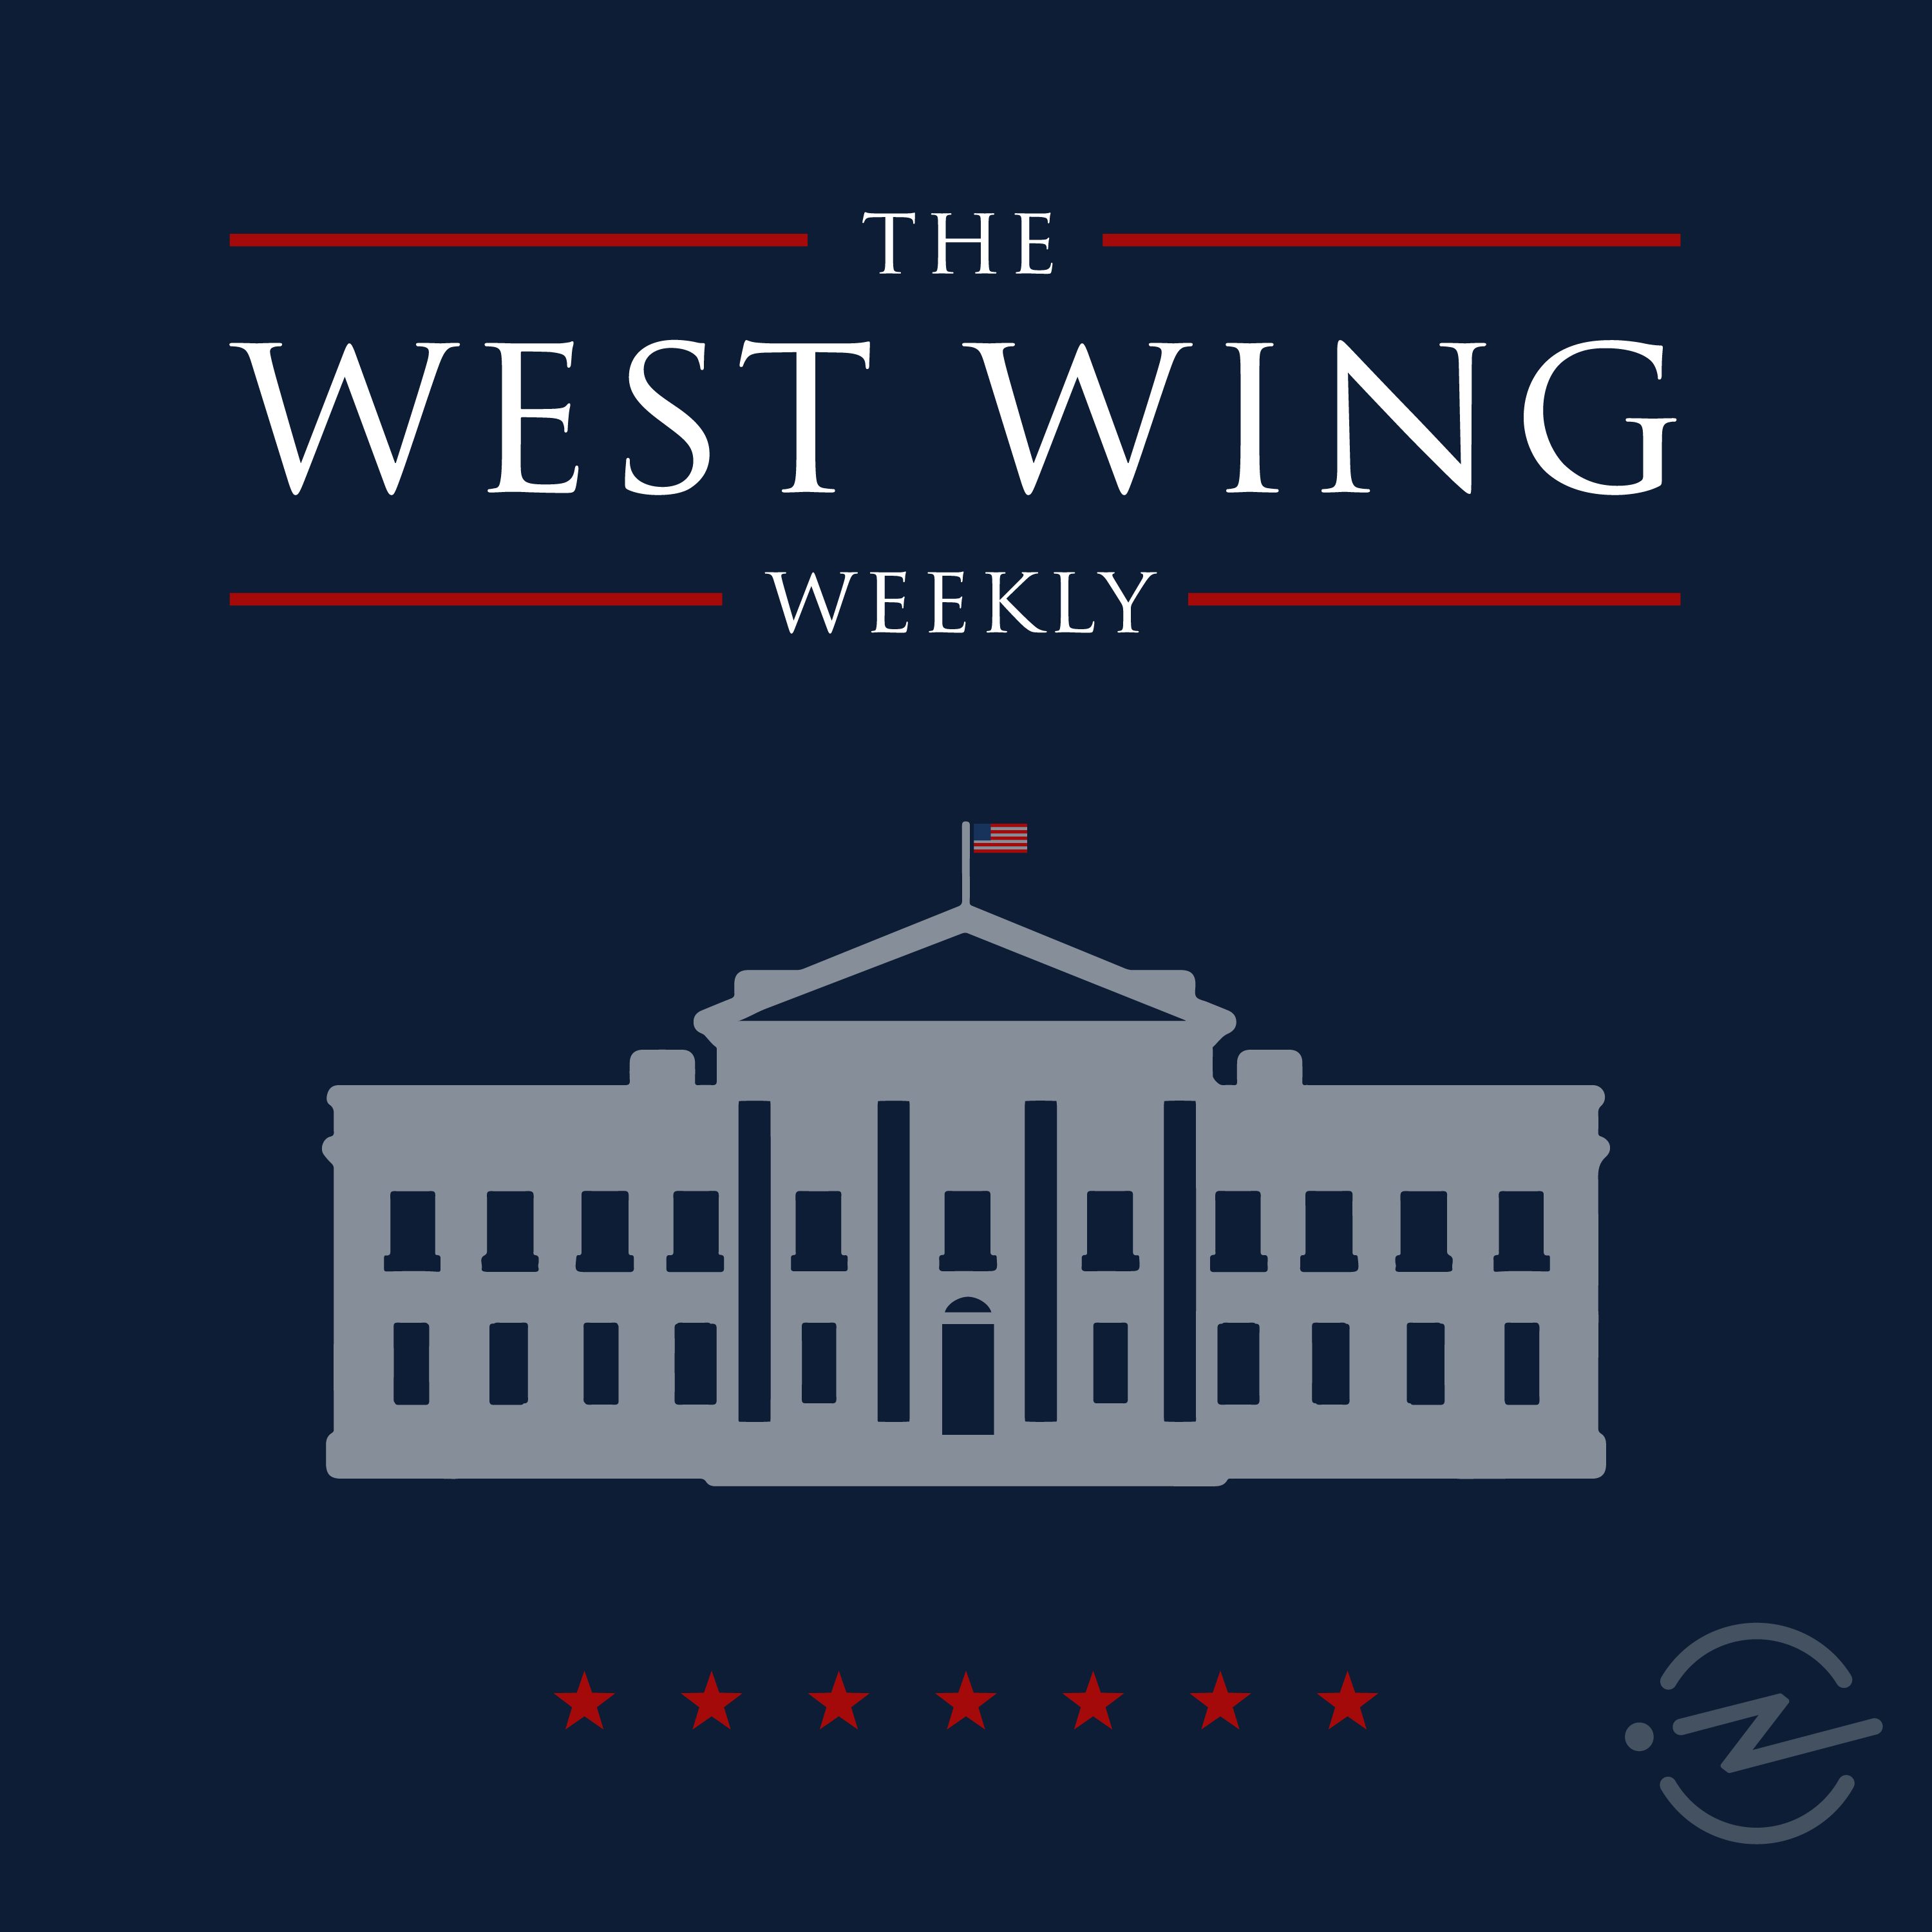 The West Wing Weekly podcast